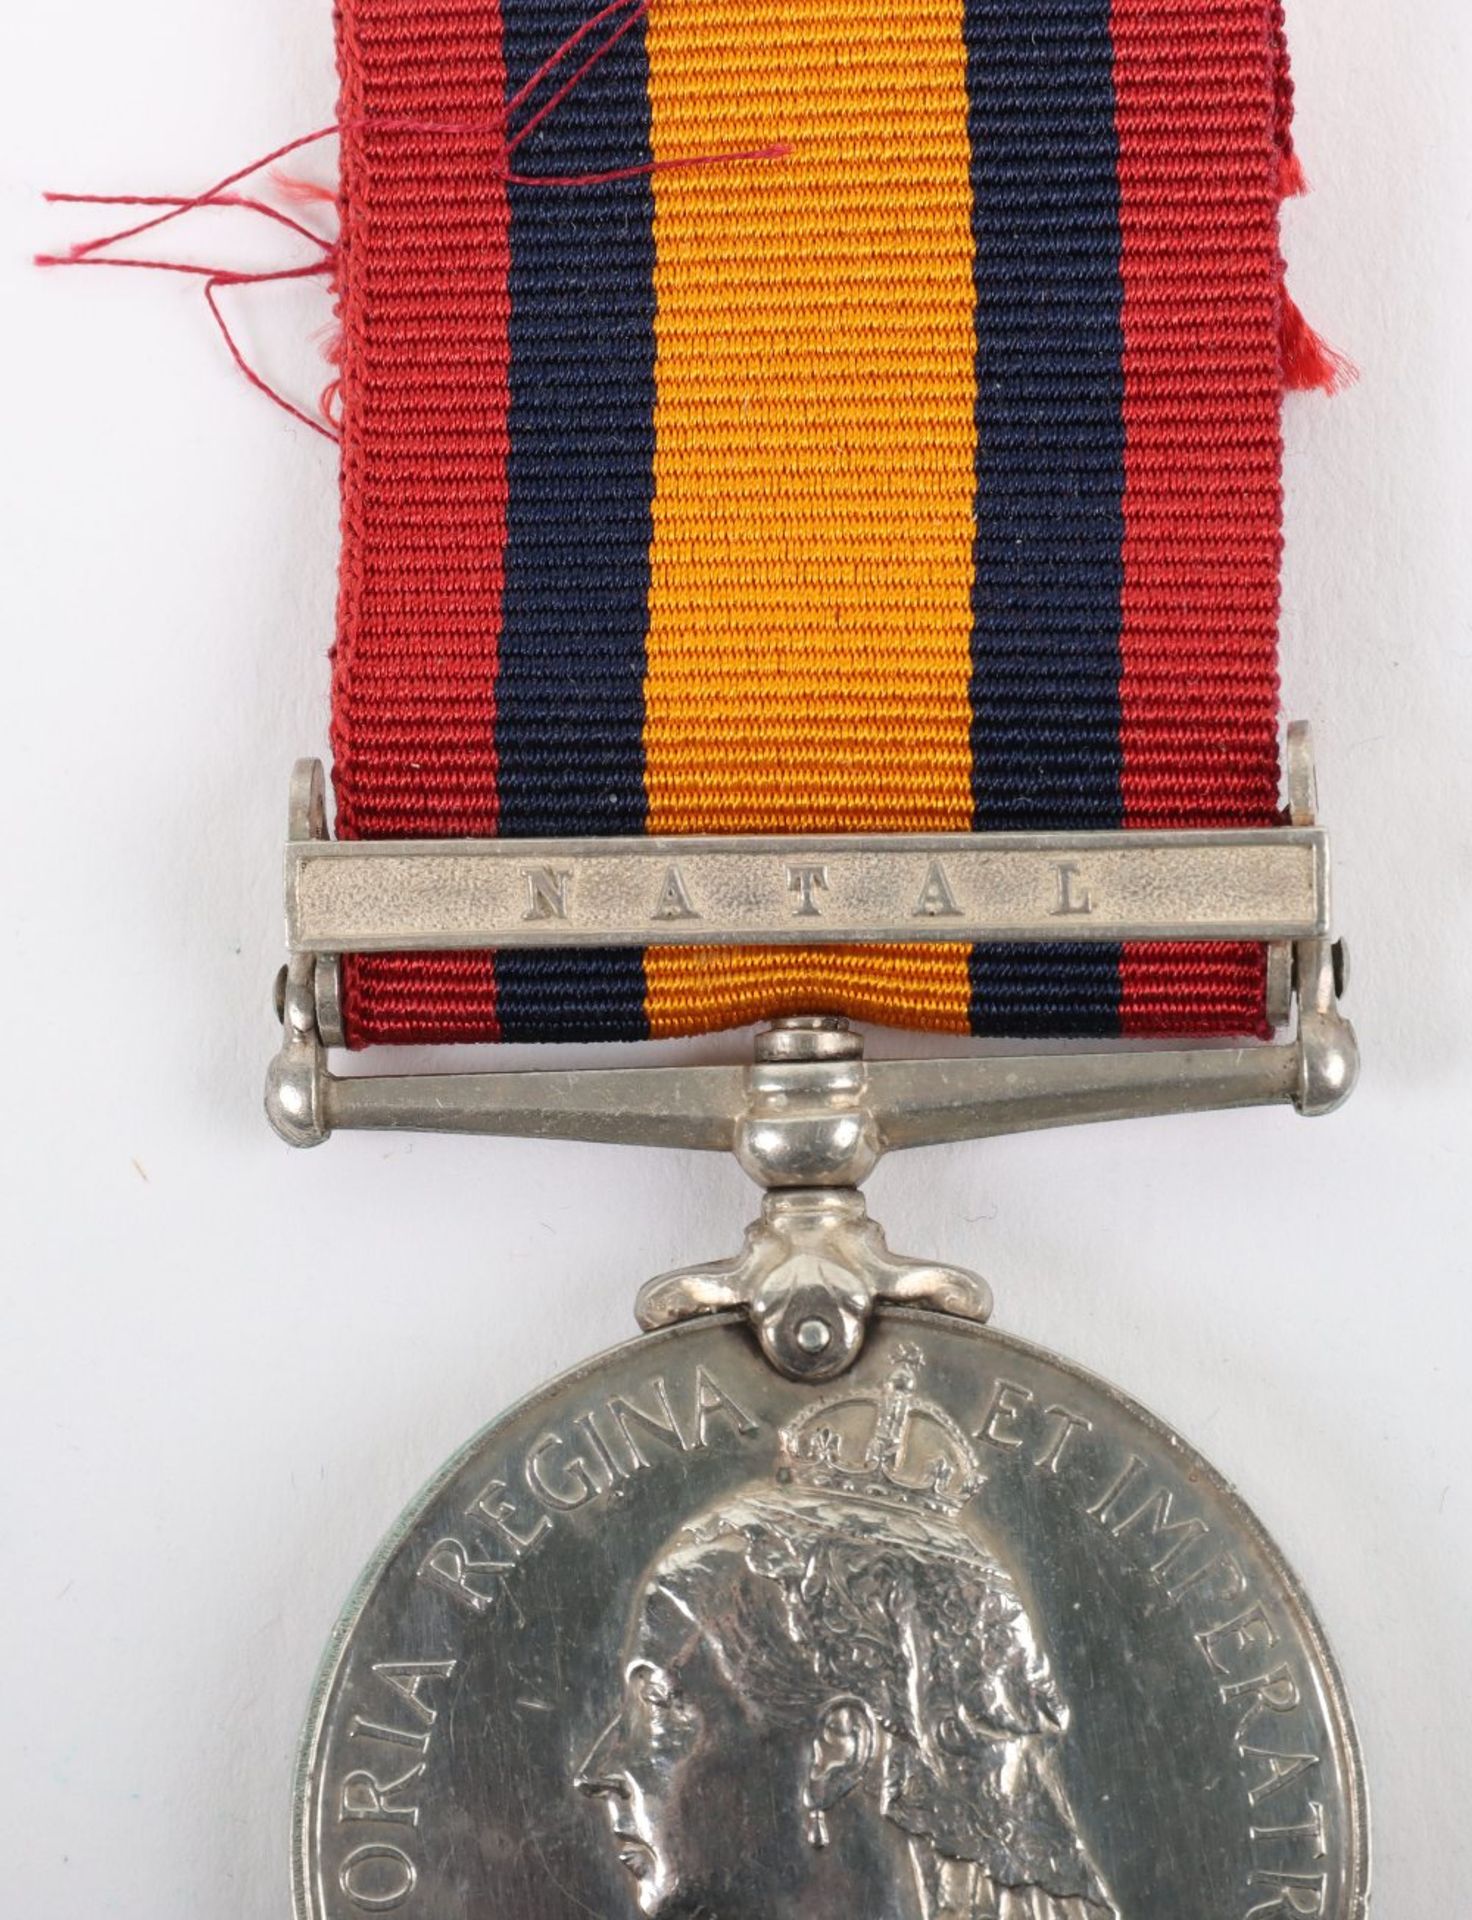 Queens South Africa Medal Awarded to a Gaoler in the Natal Police - Image 3 of 4